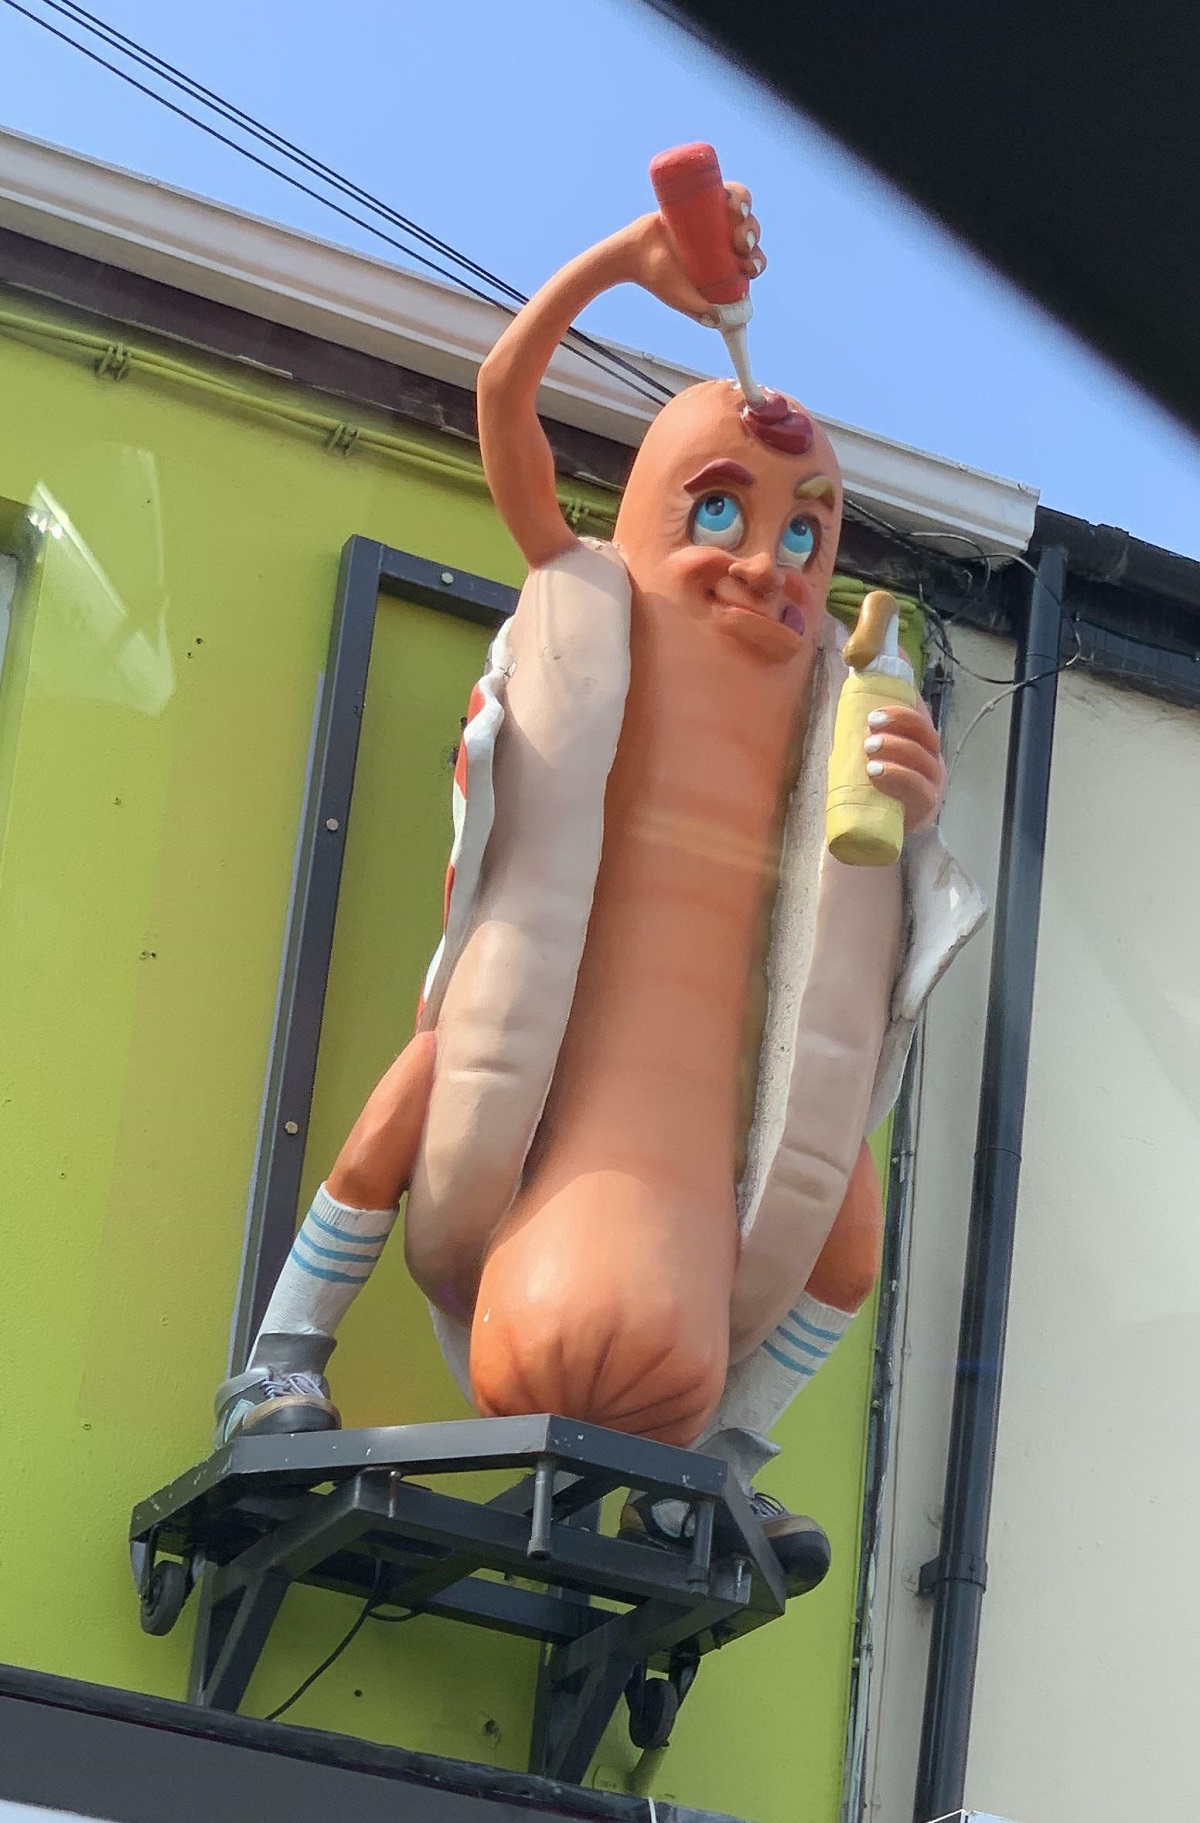 The Hotdogs Have Spread To My Town By The Looks Of It